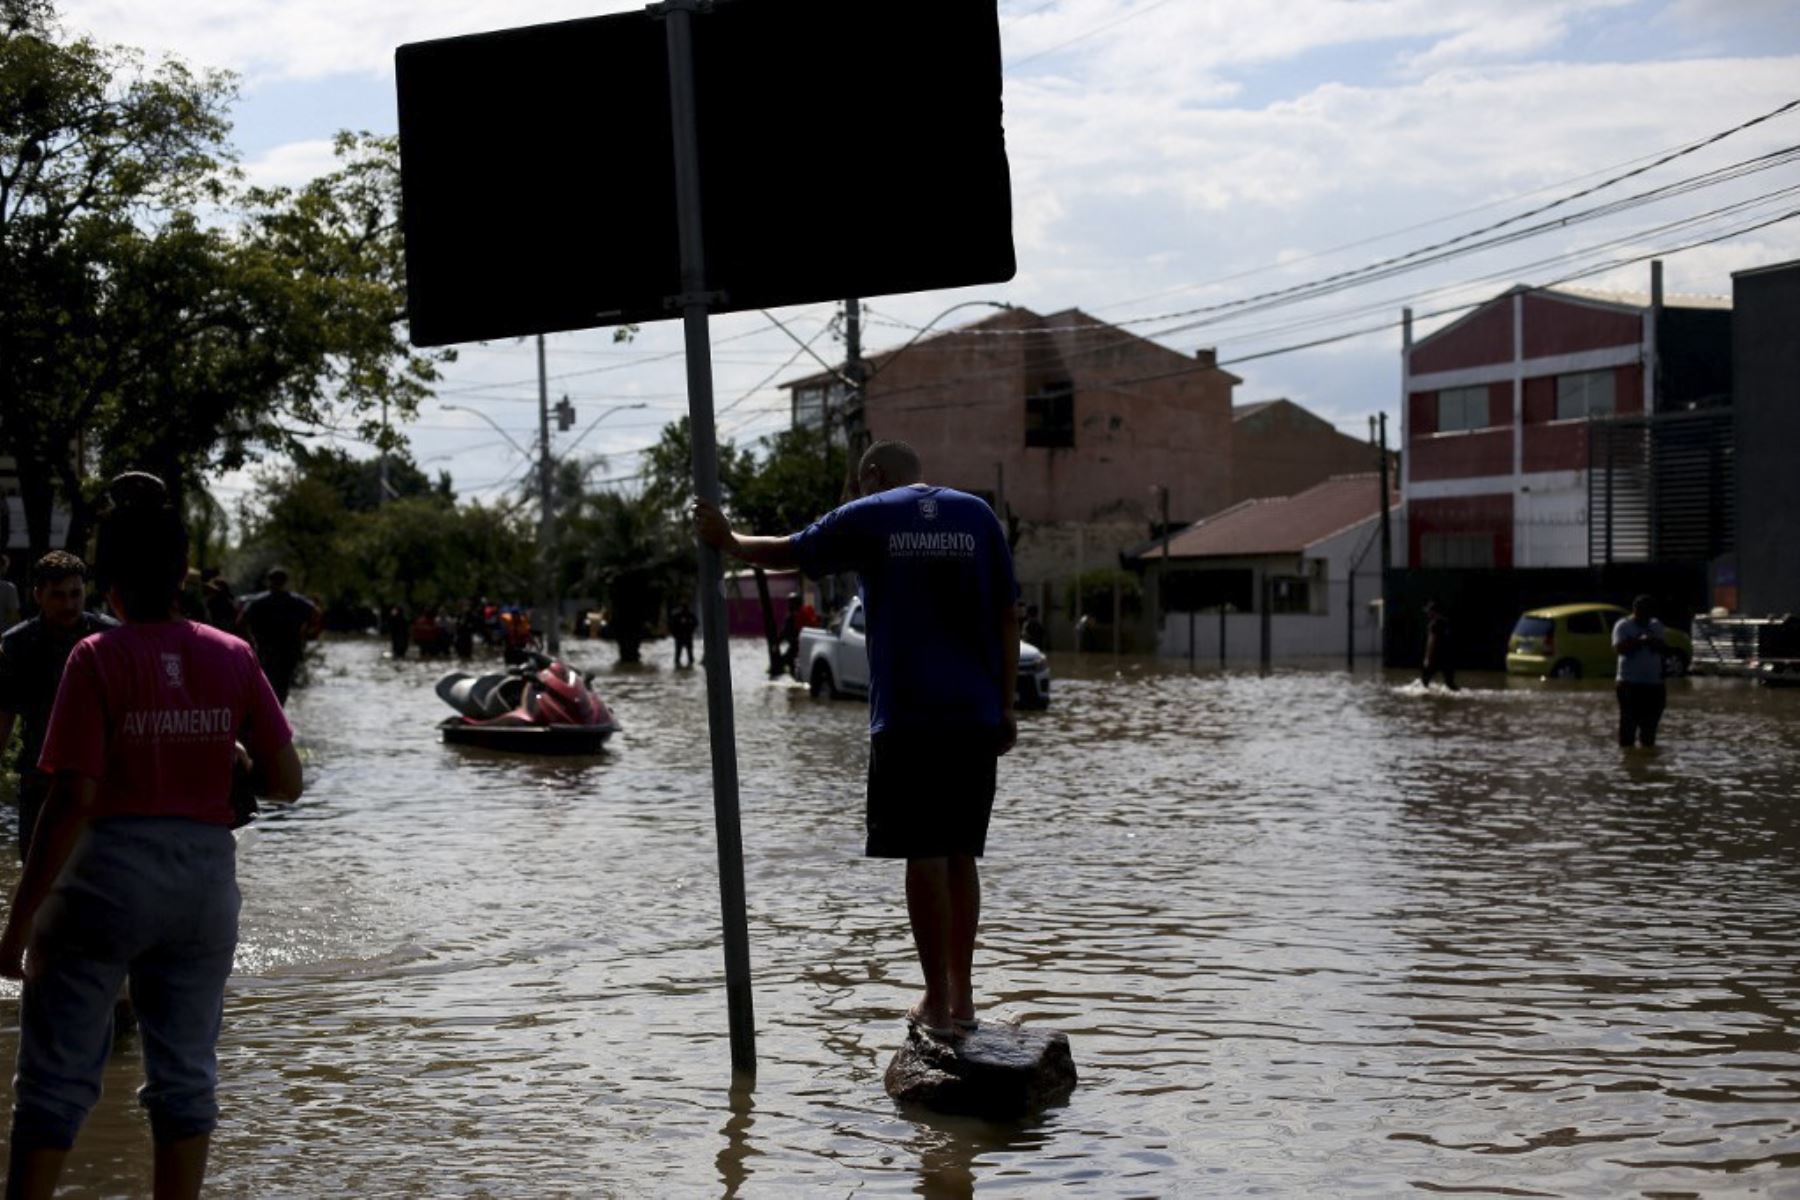 A man watches as neighbors rescued from their flooded homes are transported at the Sarandi neighborhood in Porto Alegre, Rio Grande do Sul state, Brazil, on May 5, 2024. The challenge is titanic and against the clock: authorities and neighbours are trying to avoid an even greater tragedy than the one already experienced in the Brazilian state of Rio Grande do Sul, where 66 people died and 80,000 were displaced by the floods, according to the authorities. Foto: AFP